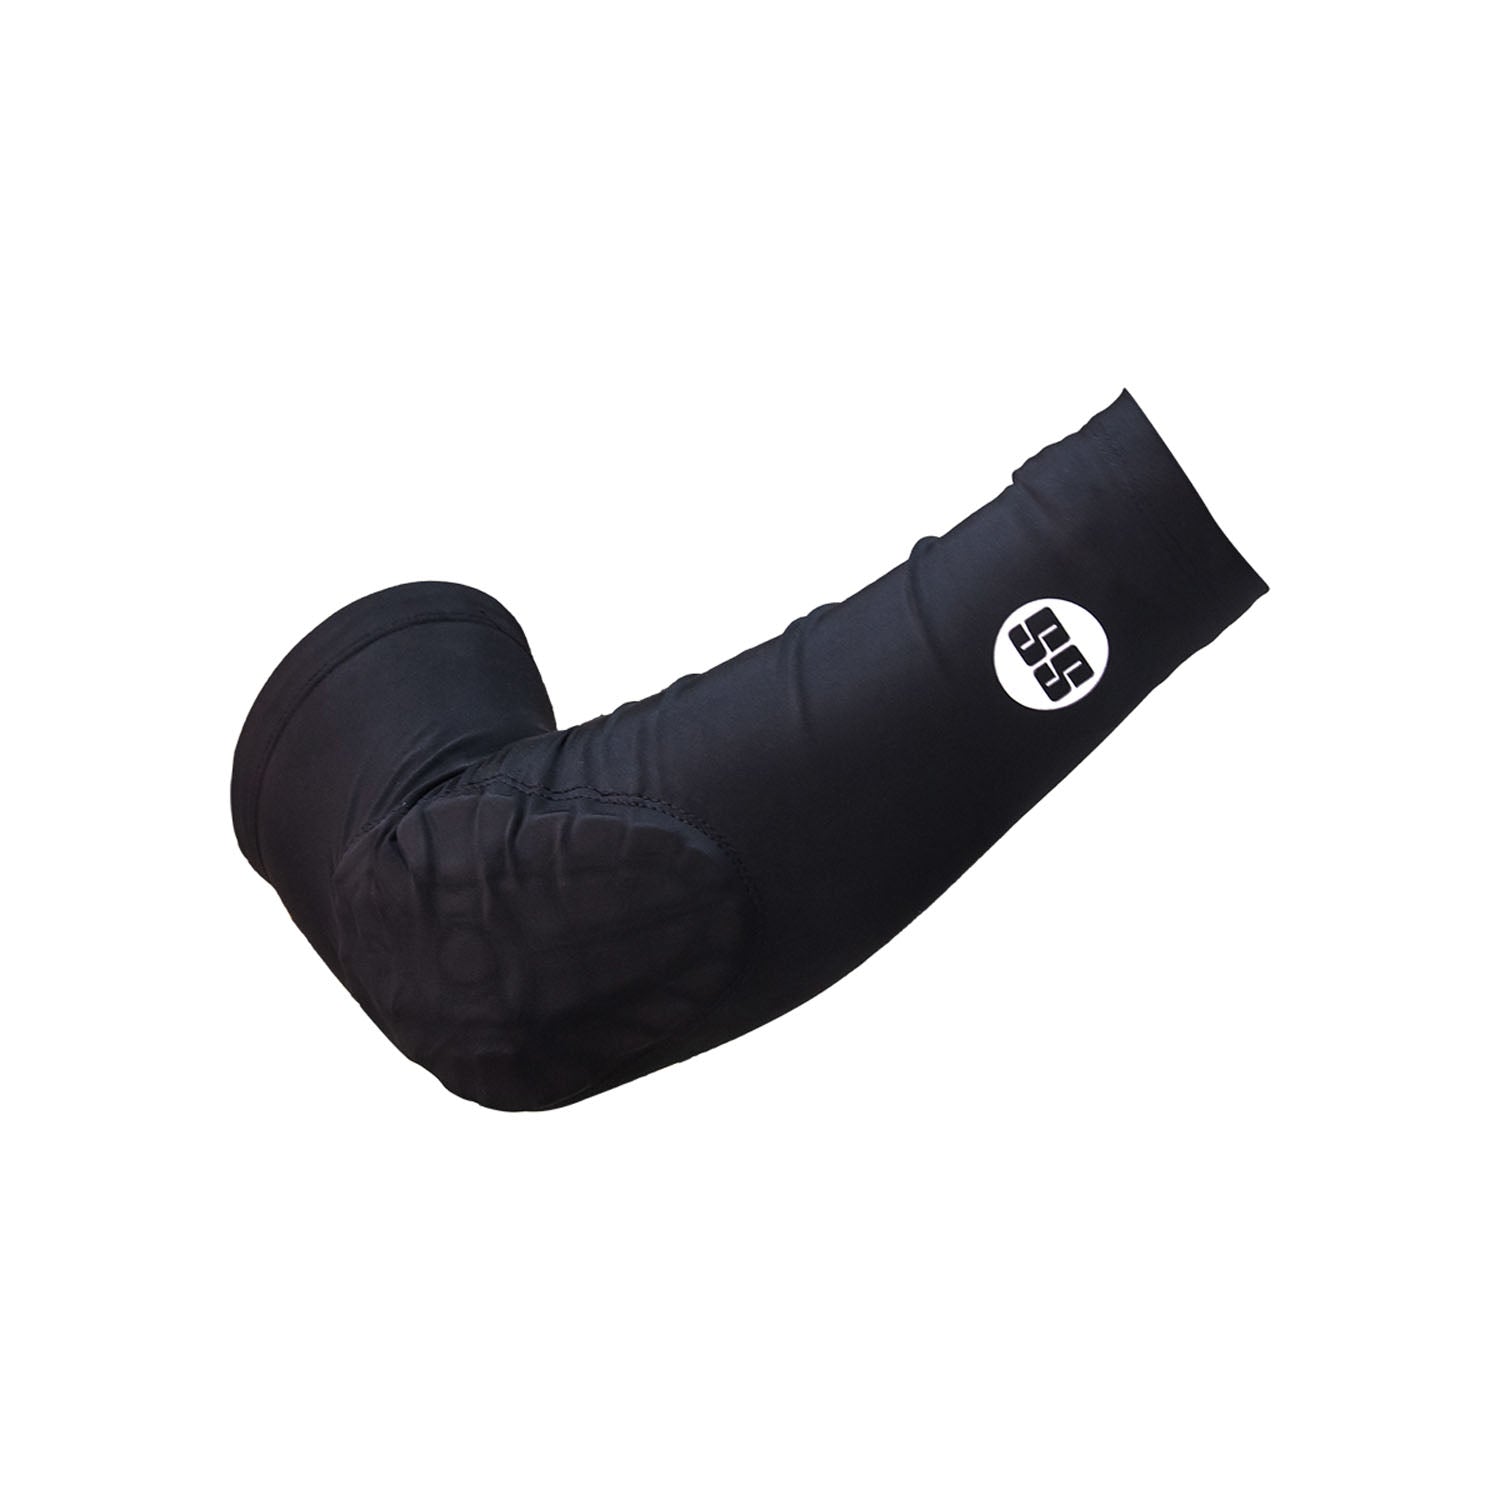 SS Pro Super Elbow Sleeves, Pack Of 1 - Best Price online Prokicksports.com